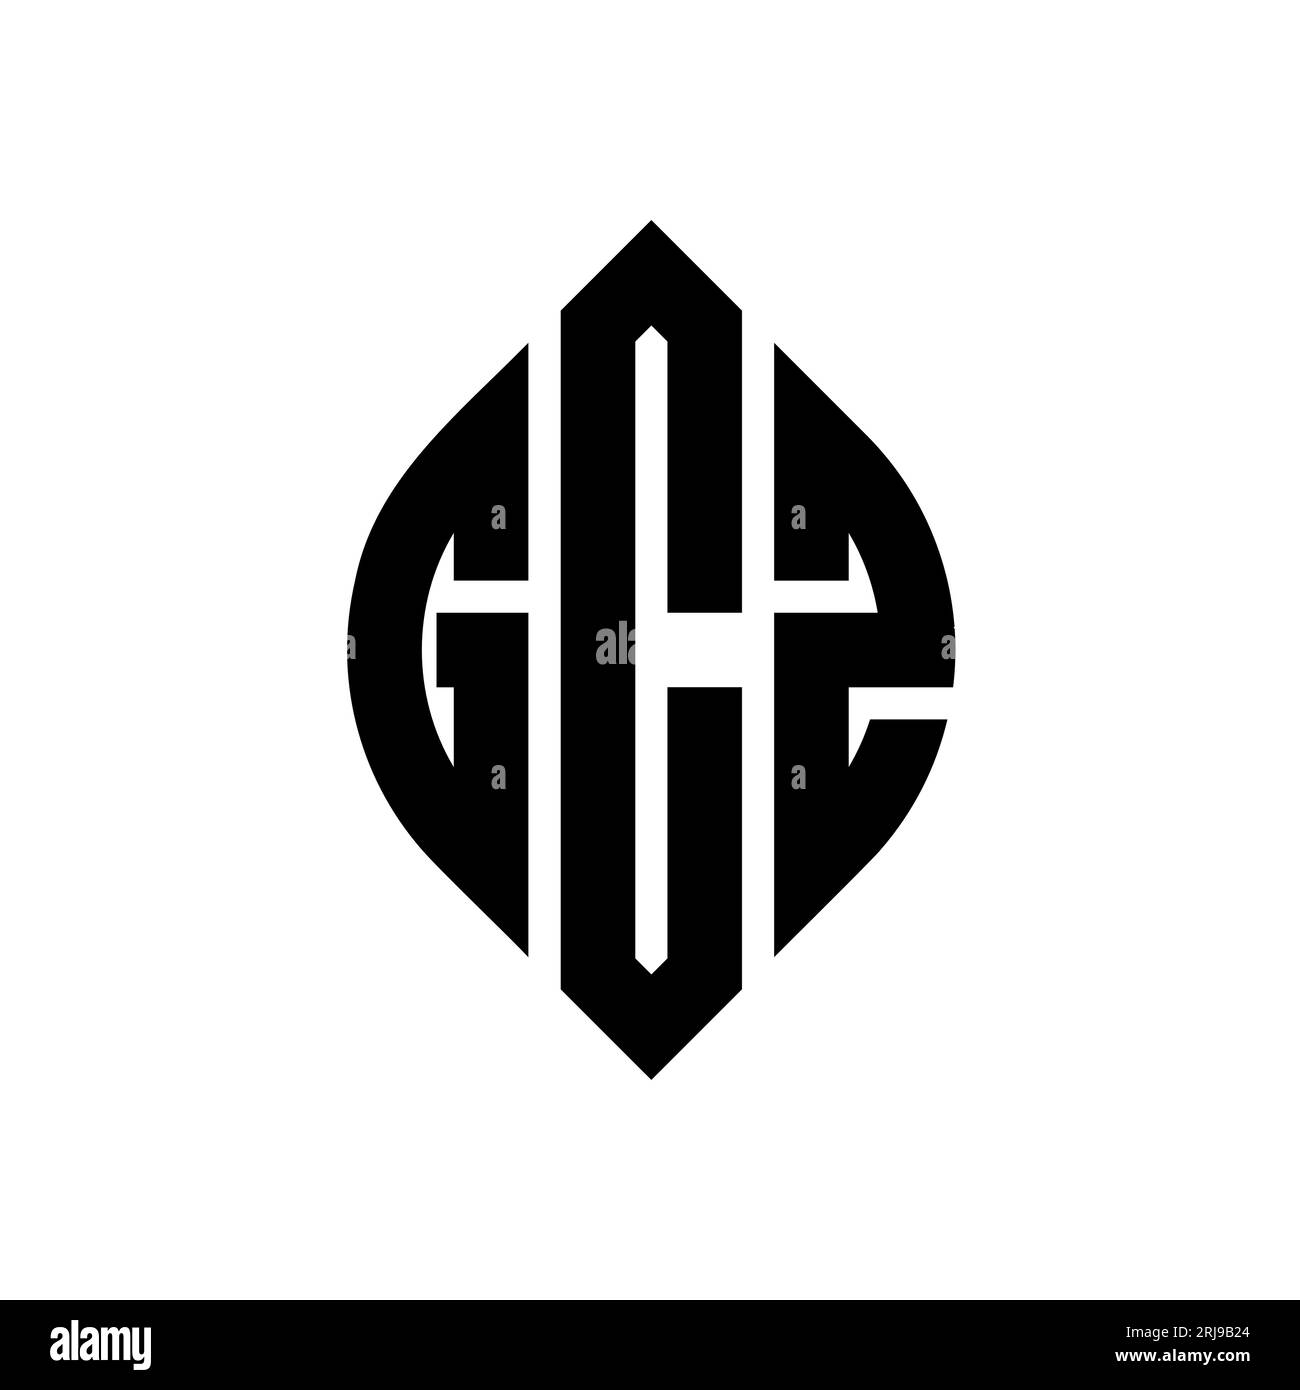 GCZ circle letter logo design with circle and ellipse shape. GCZ ellipse letters with typographic style. The three initials form a circle logo. GCZ Ci Stock Vector